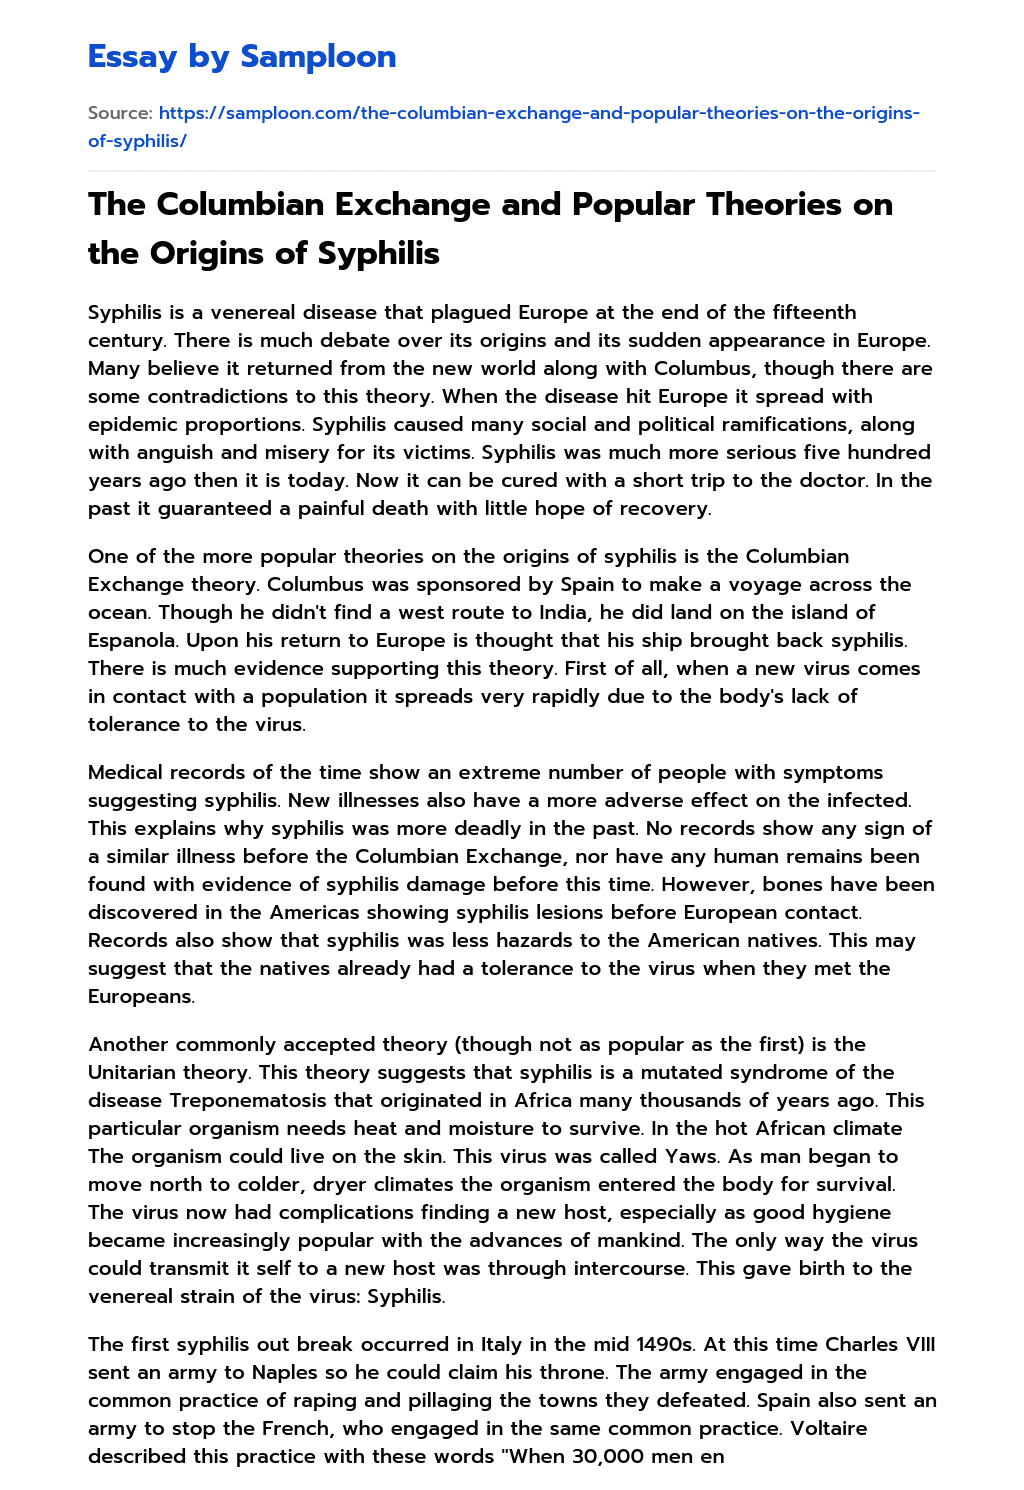 The Columbian Exchange and Popular Theories on the Origins of Syphilis essay